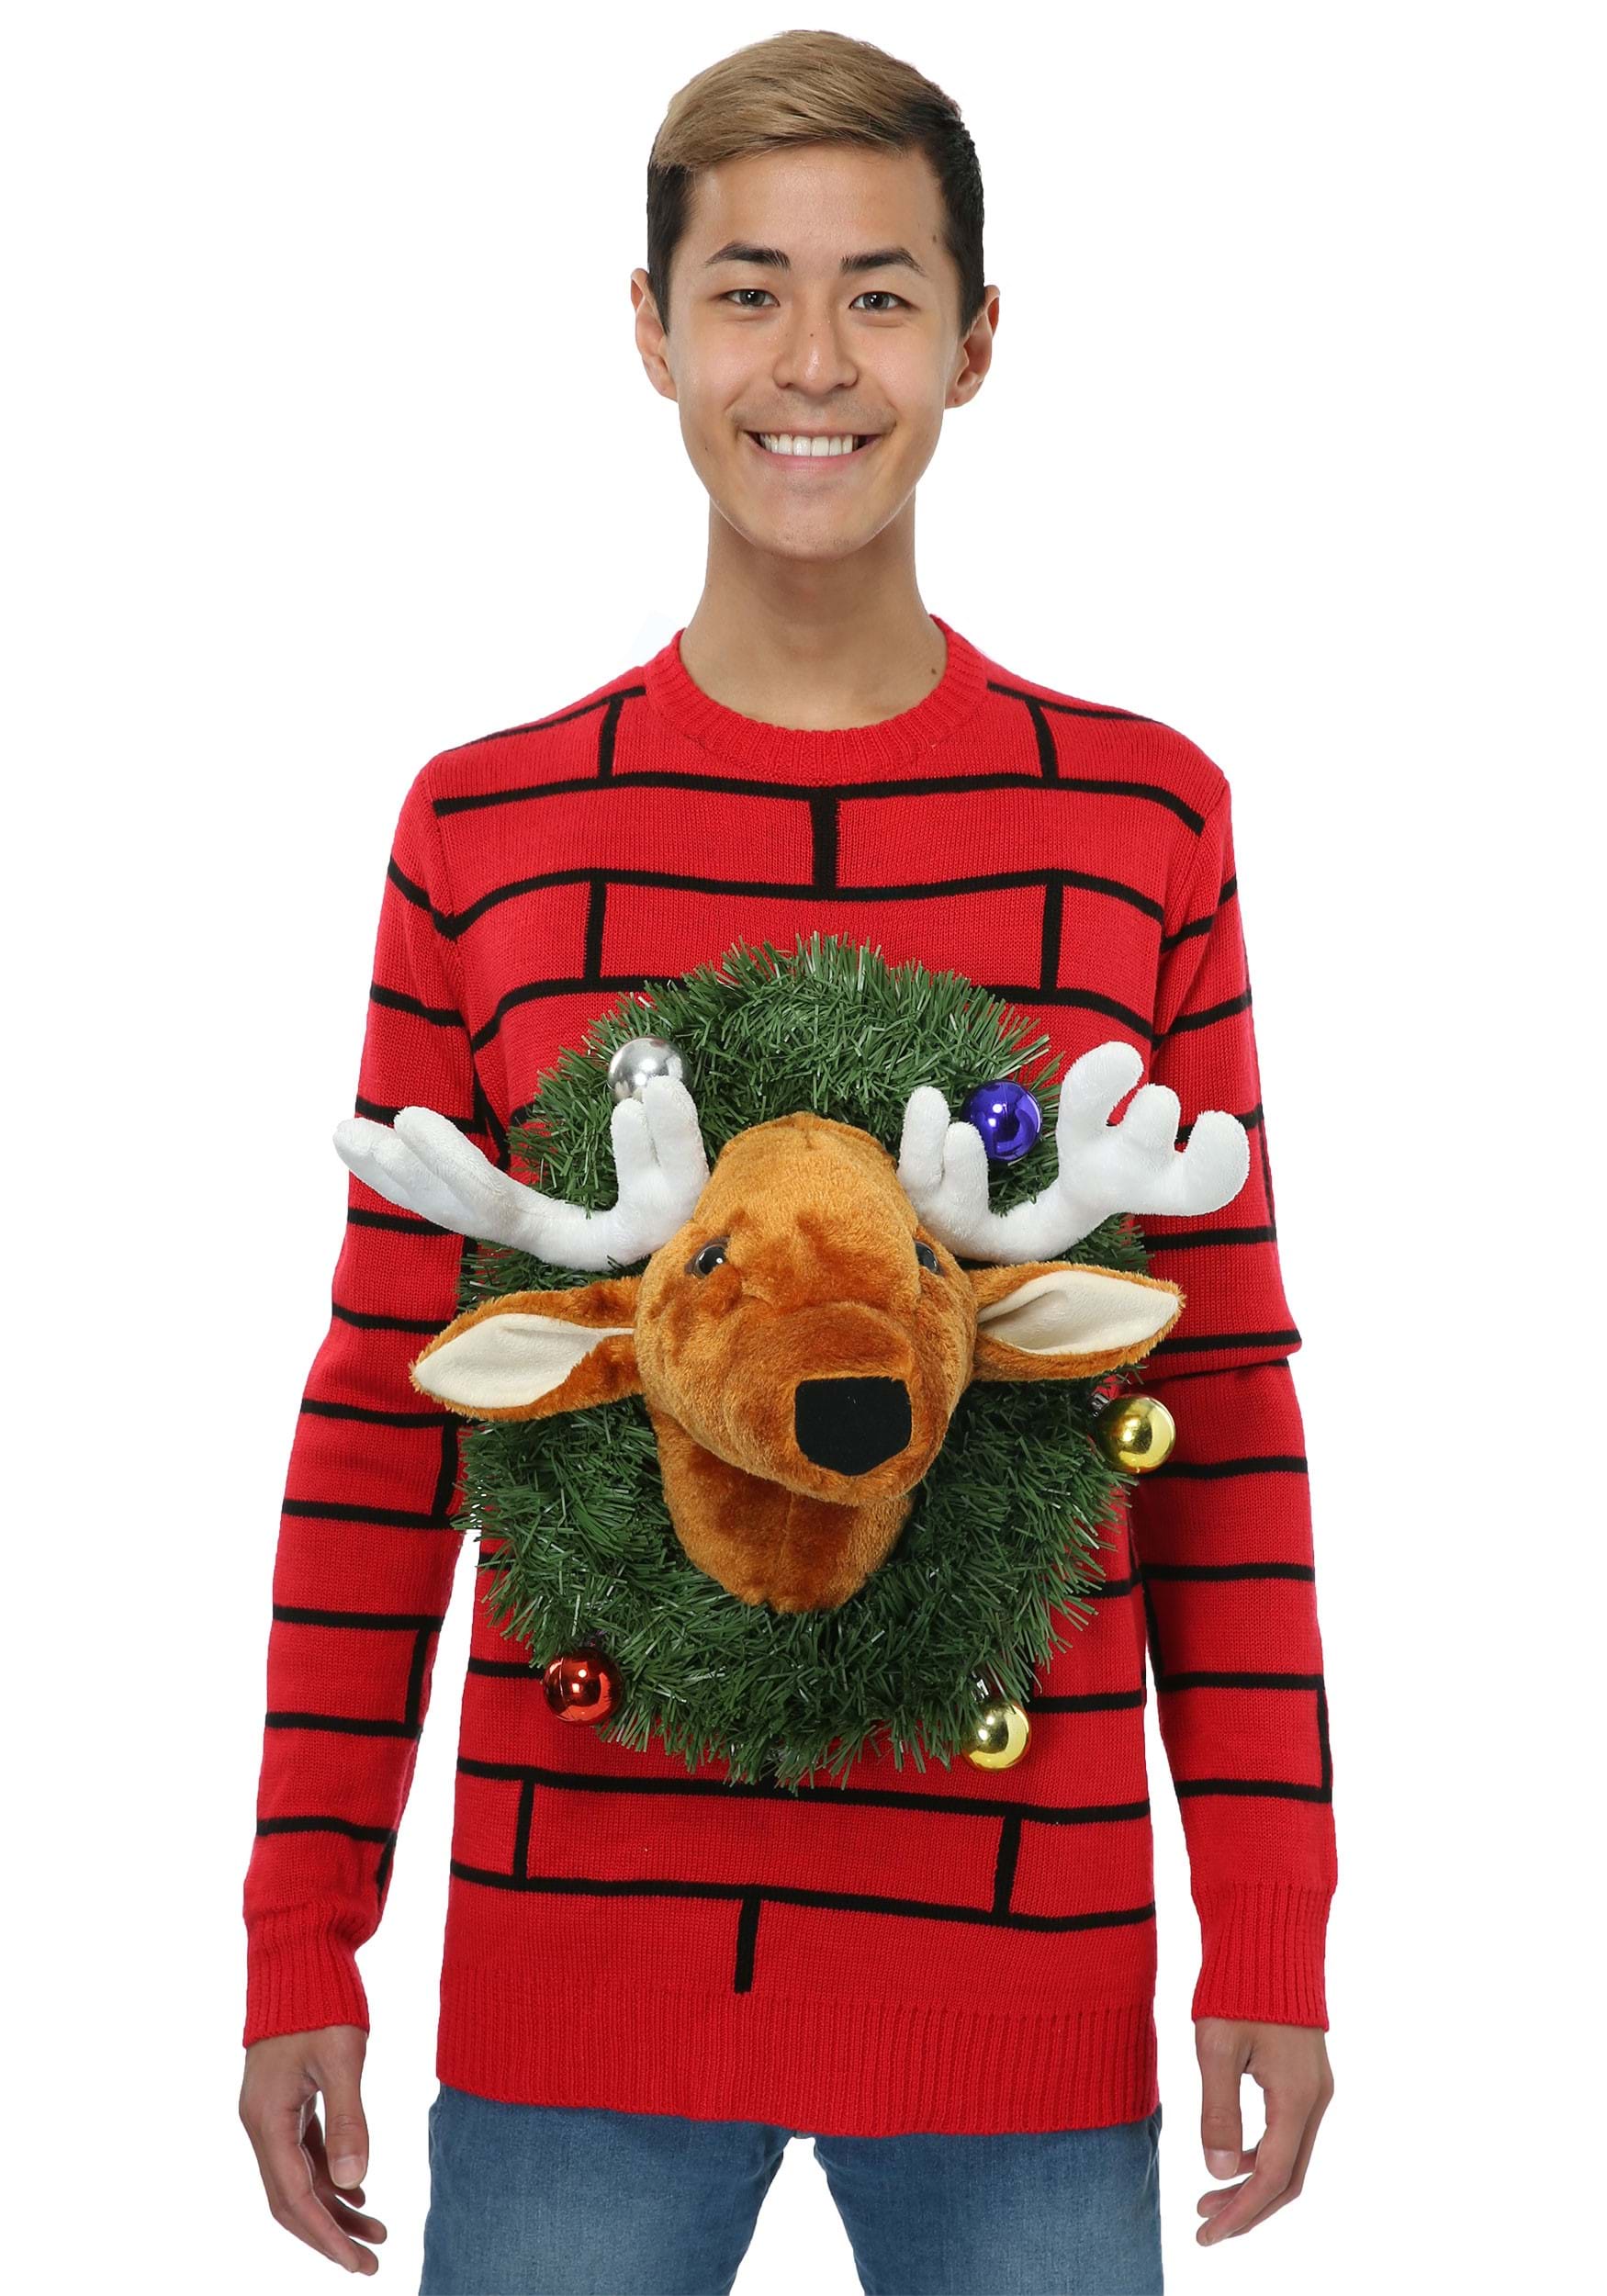 Photos - Fancy Dress Reindeer FUN Wear Adult  Head Ugly Christmas Sweater | Made by Us Sweaters 